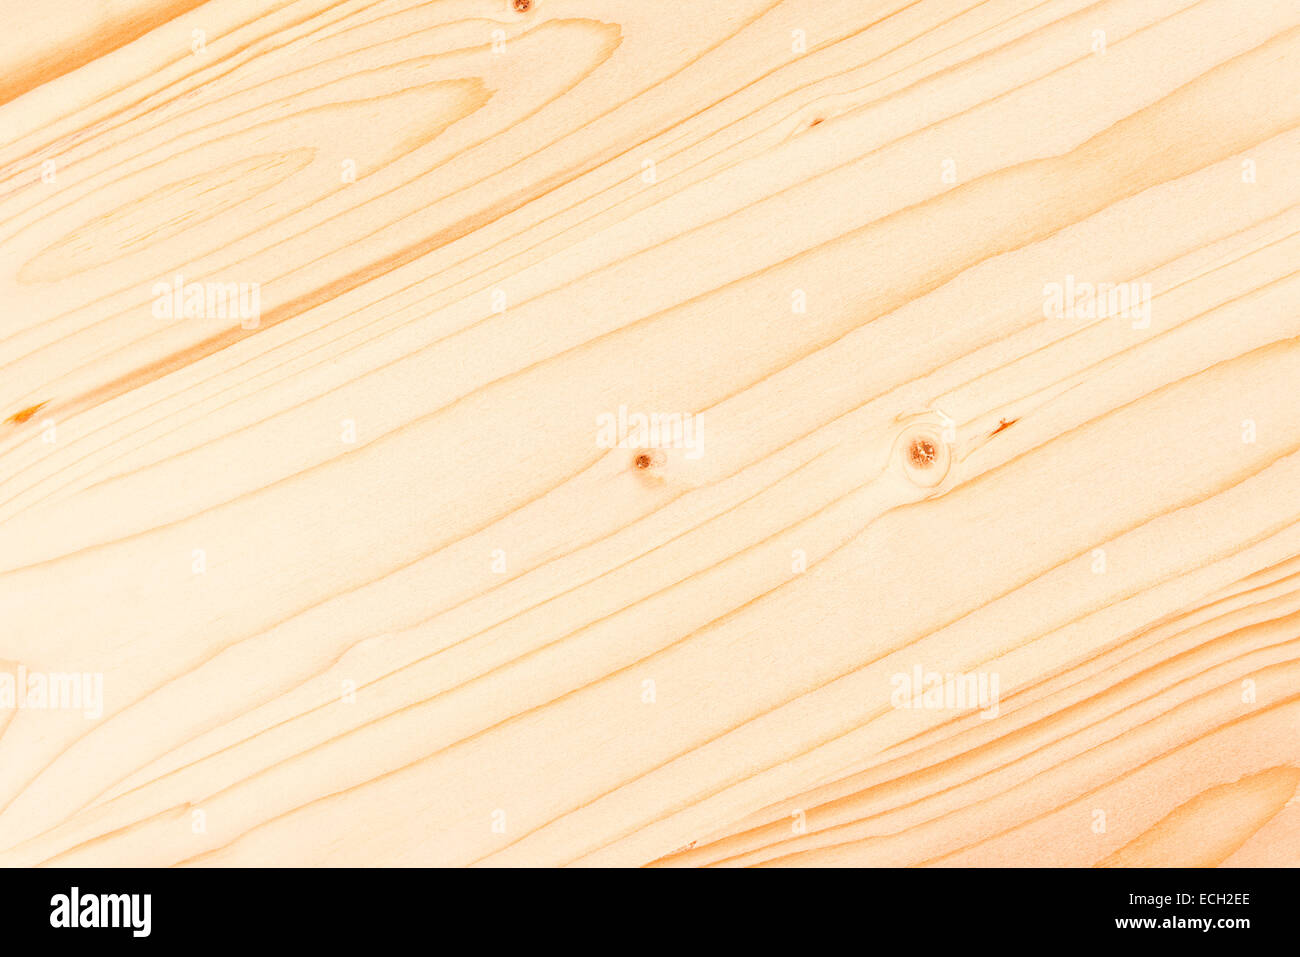 Pine wood plank texture pattern as natural background for some carpentry job or woodworks design. Stock Photo